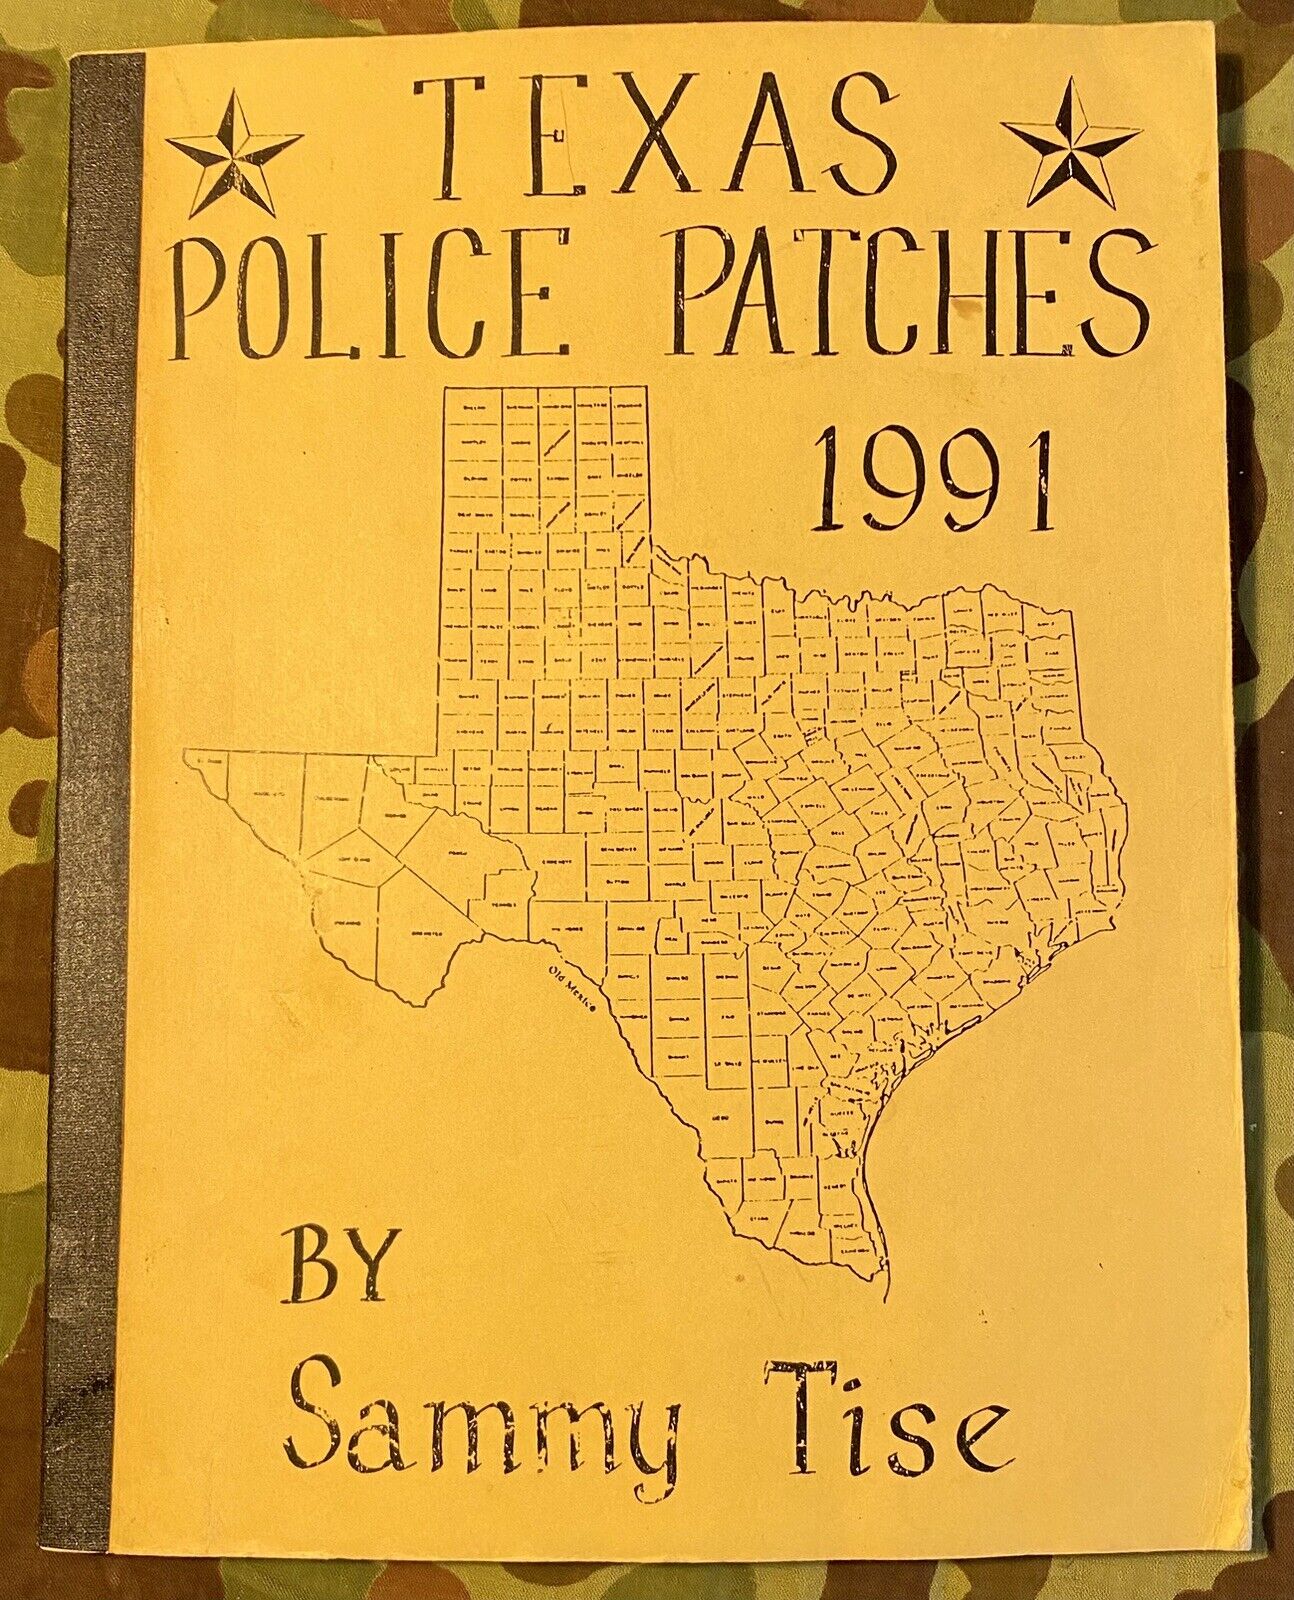 Texas Police Patches 1991 by Sammy Tise - 172 pages, Softcover, 1992